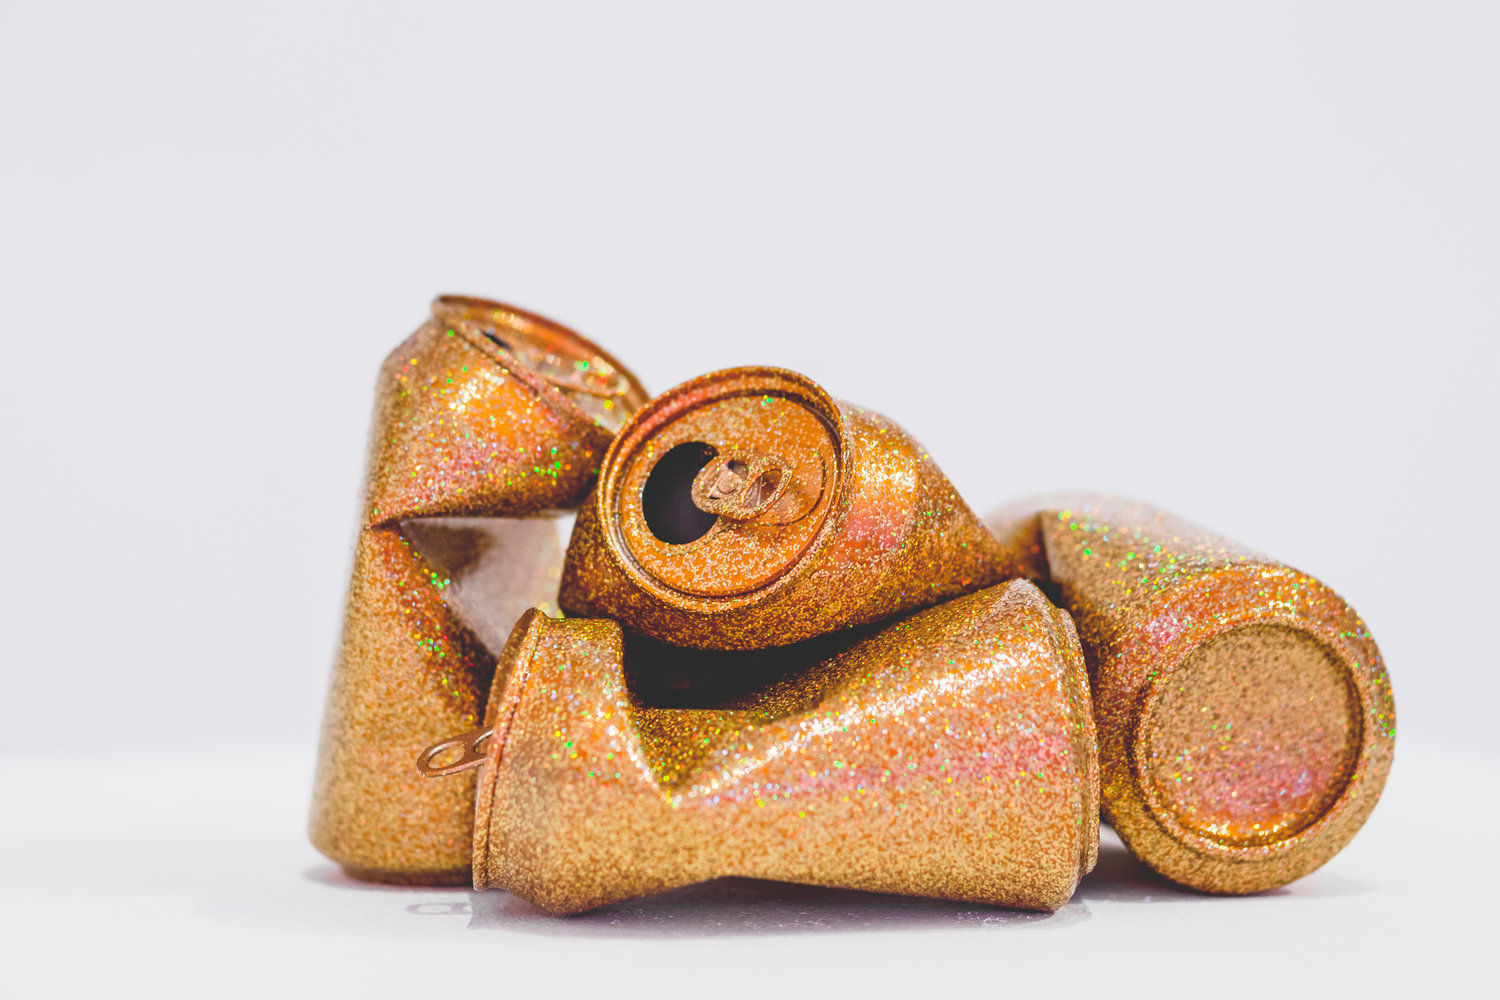 Sadie Barnette
Untitled (Can) (Gold), 2018
Metal flake on found cans&amp;nbsp;
5 x 3 x 3 inches (each)